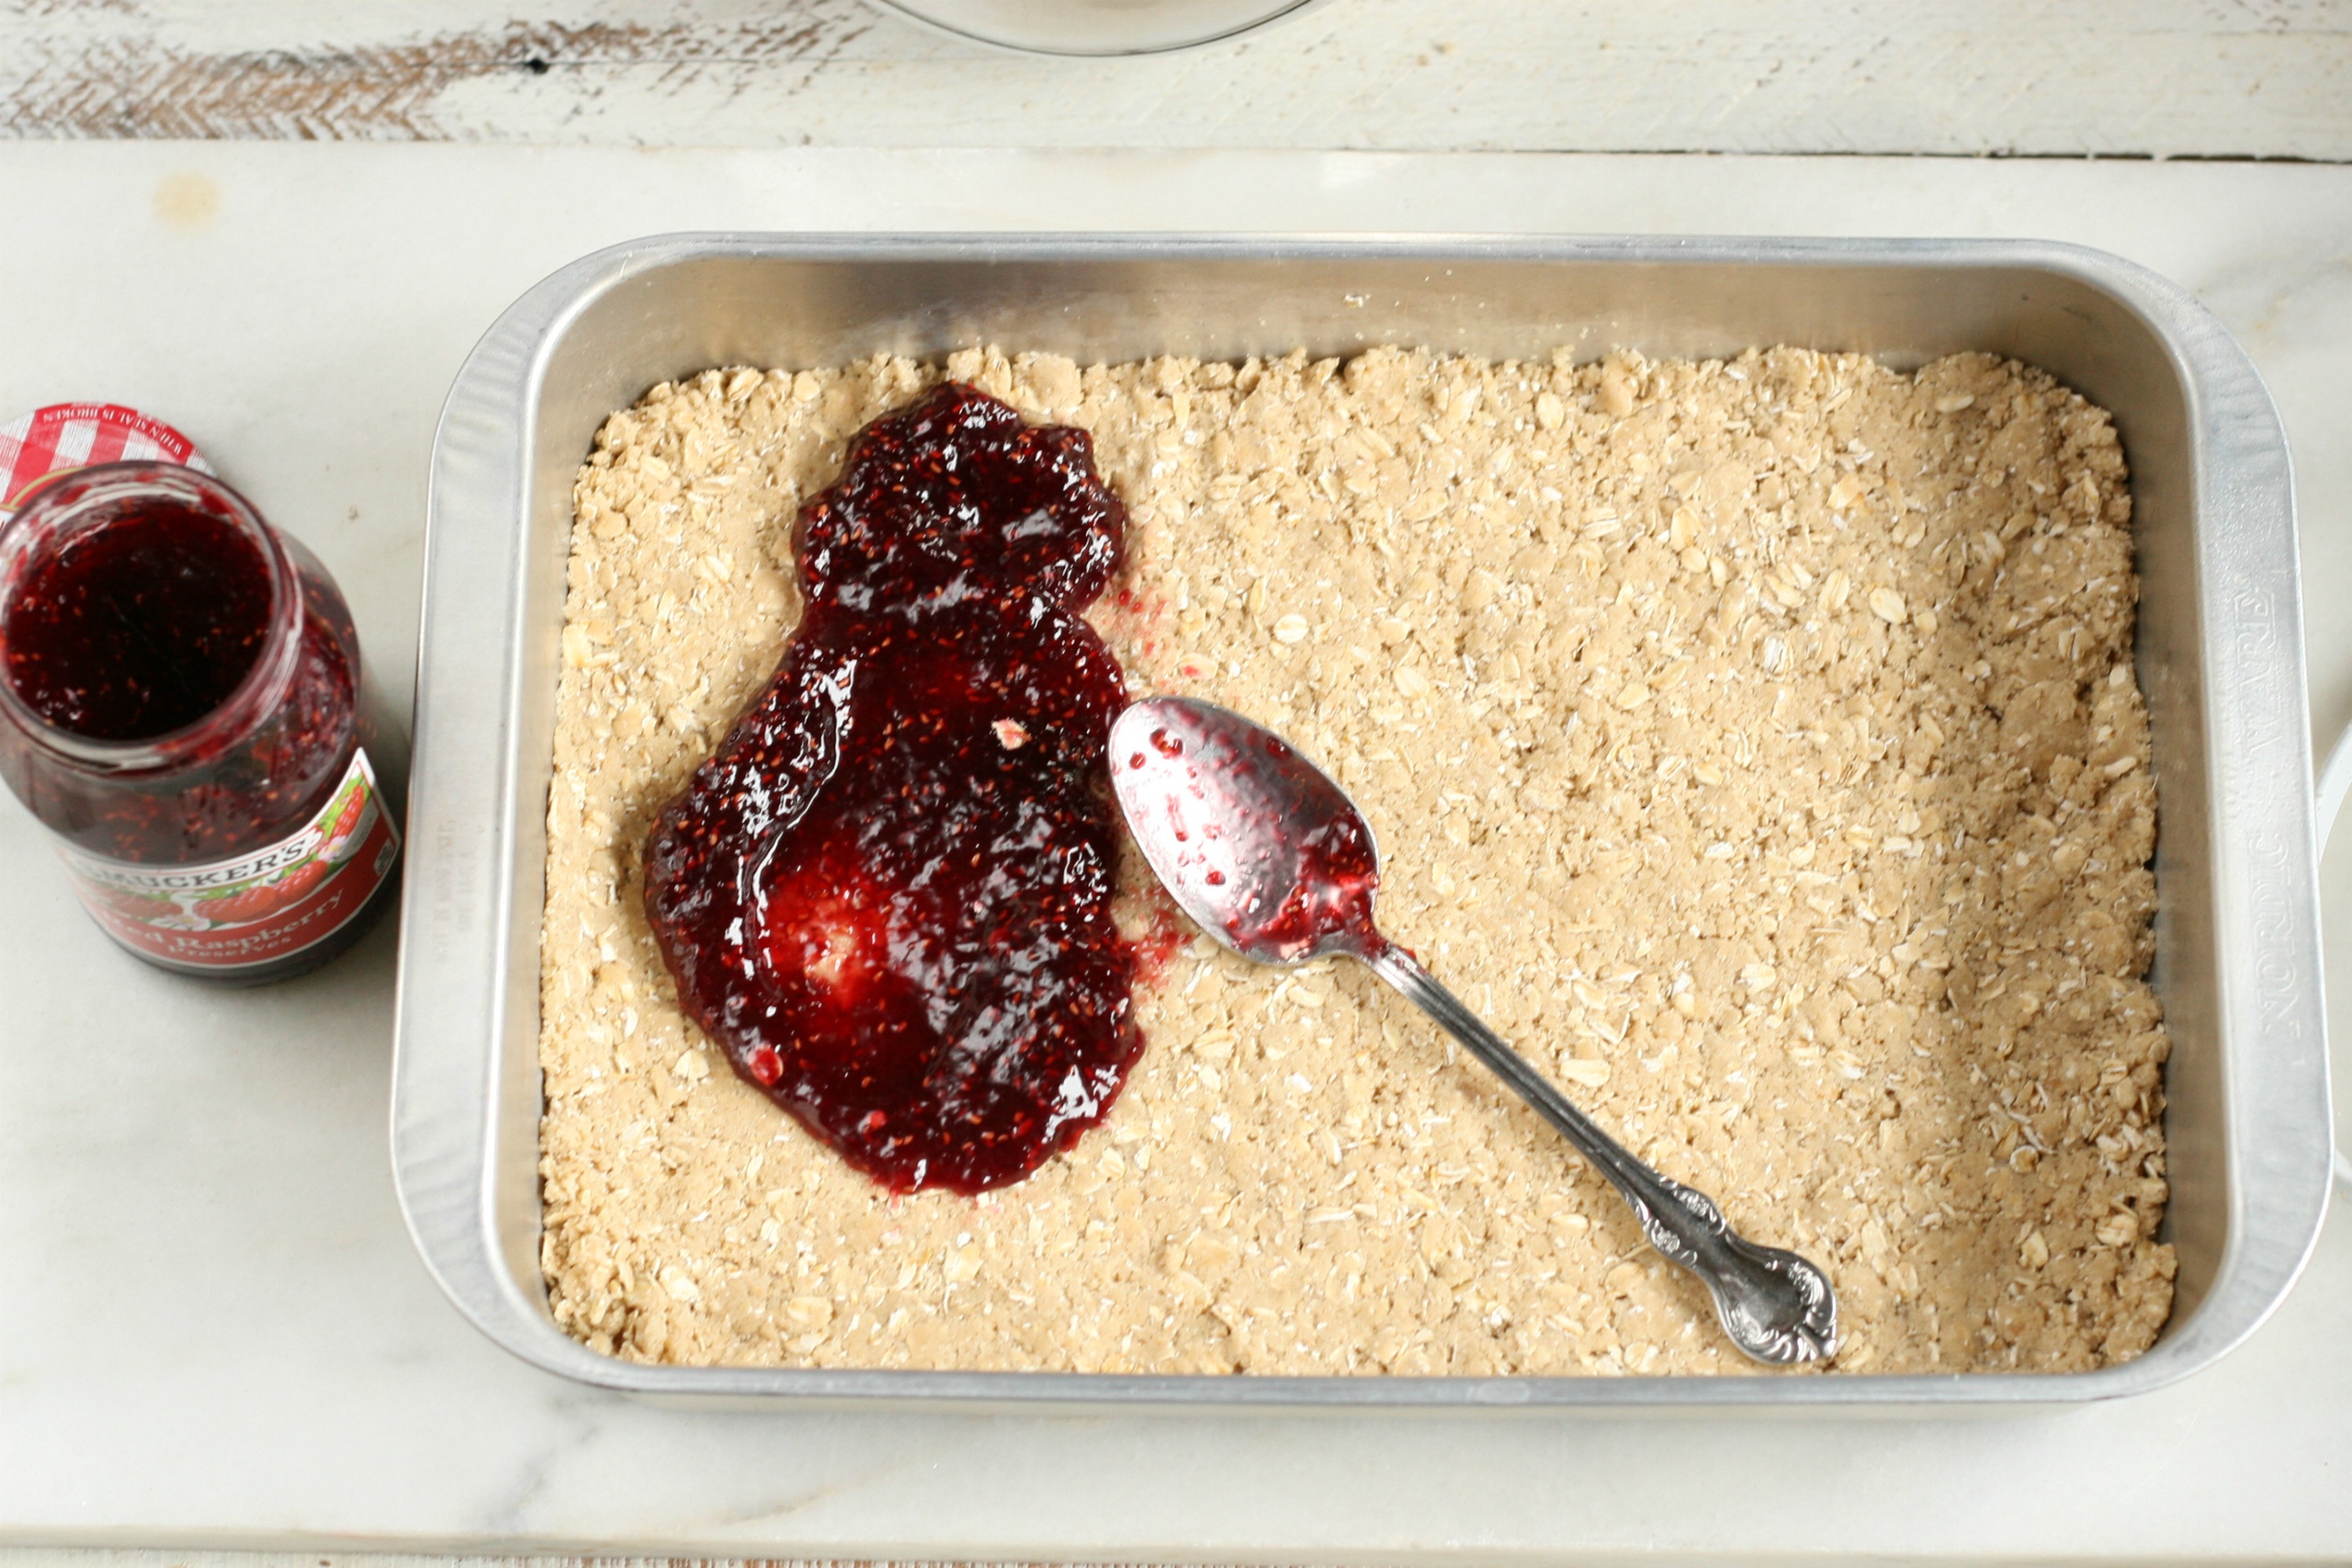 Raspberry Oatmeal Bars pressed into a baking pan and spreading raspberry jam layer with a spoon.